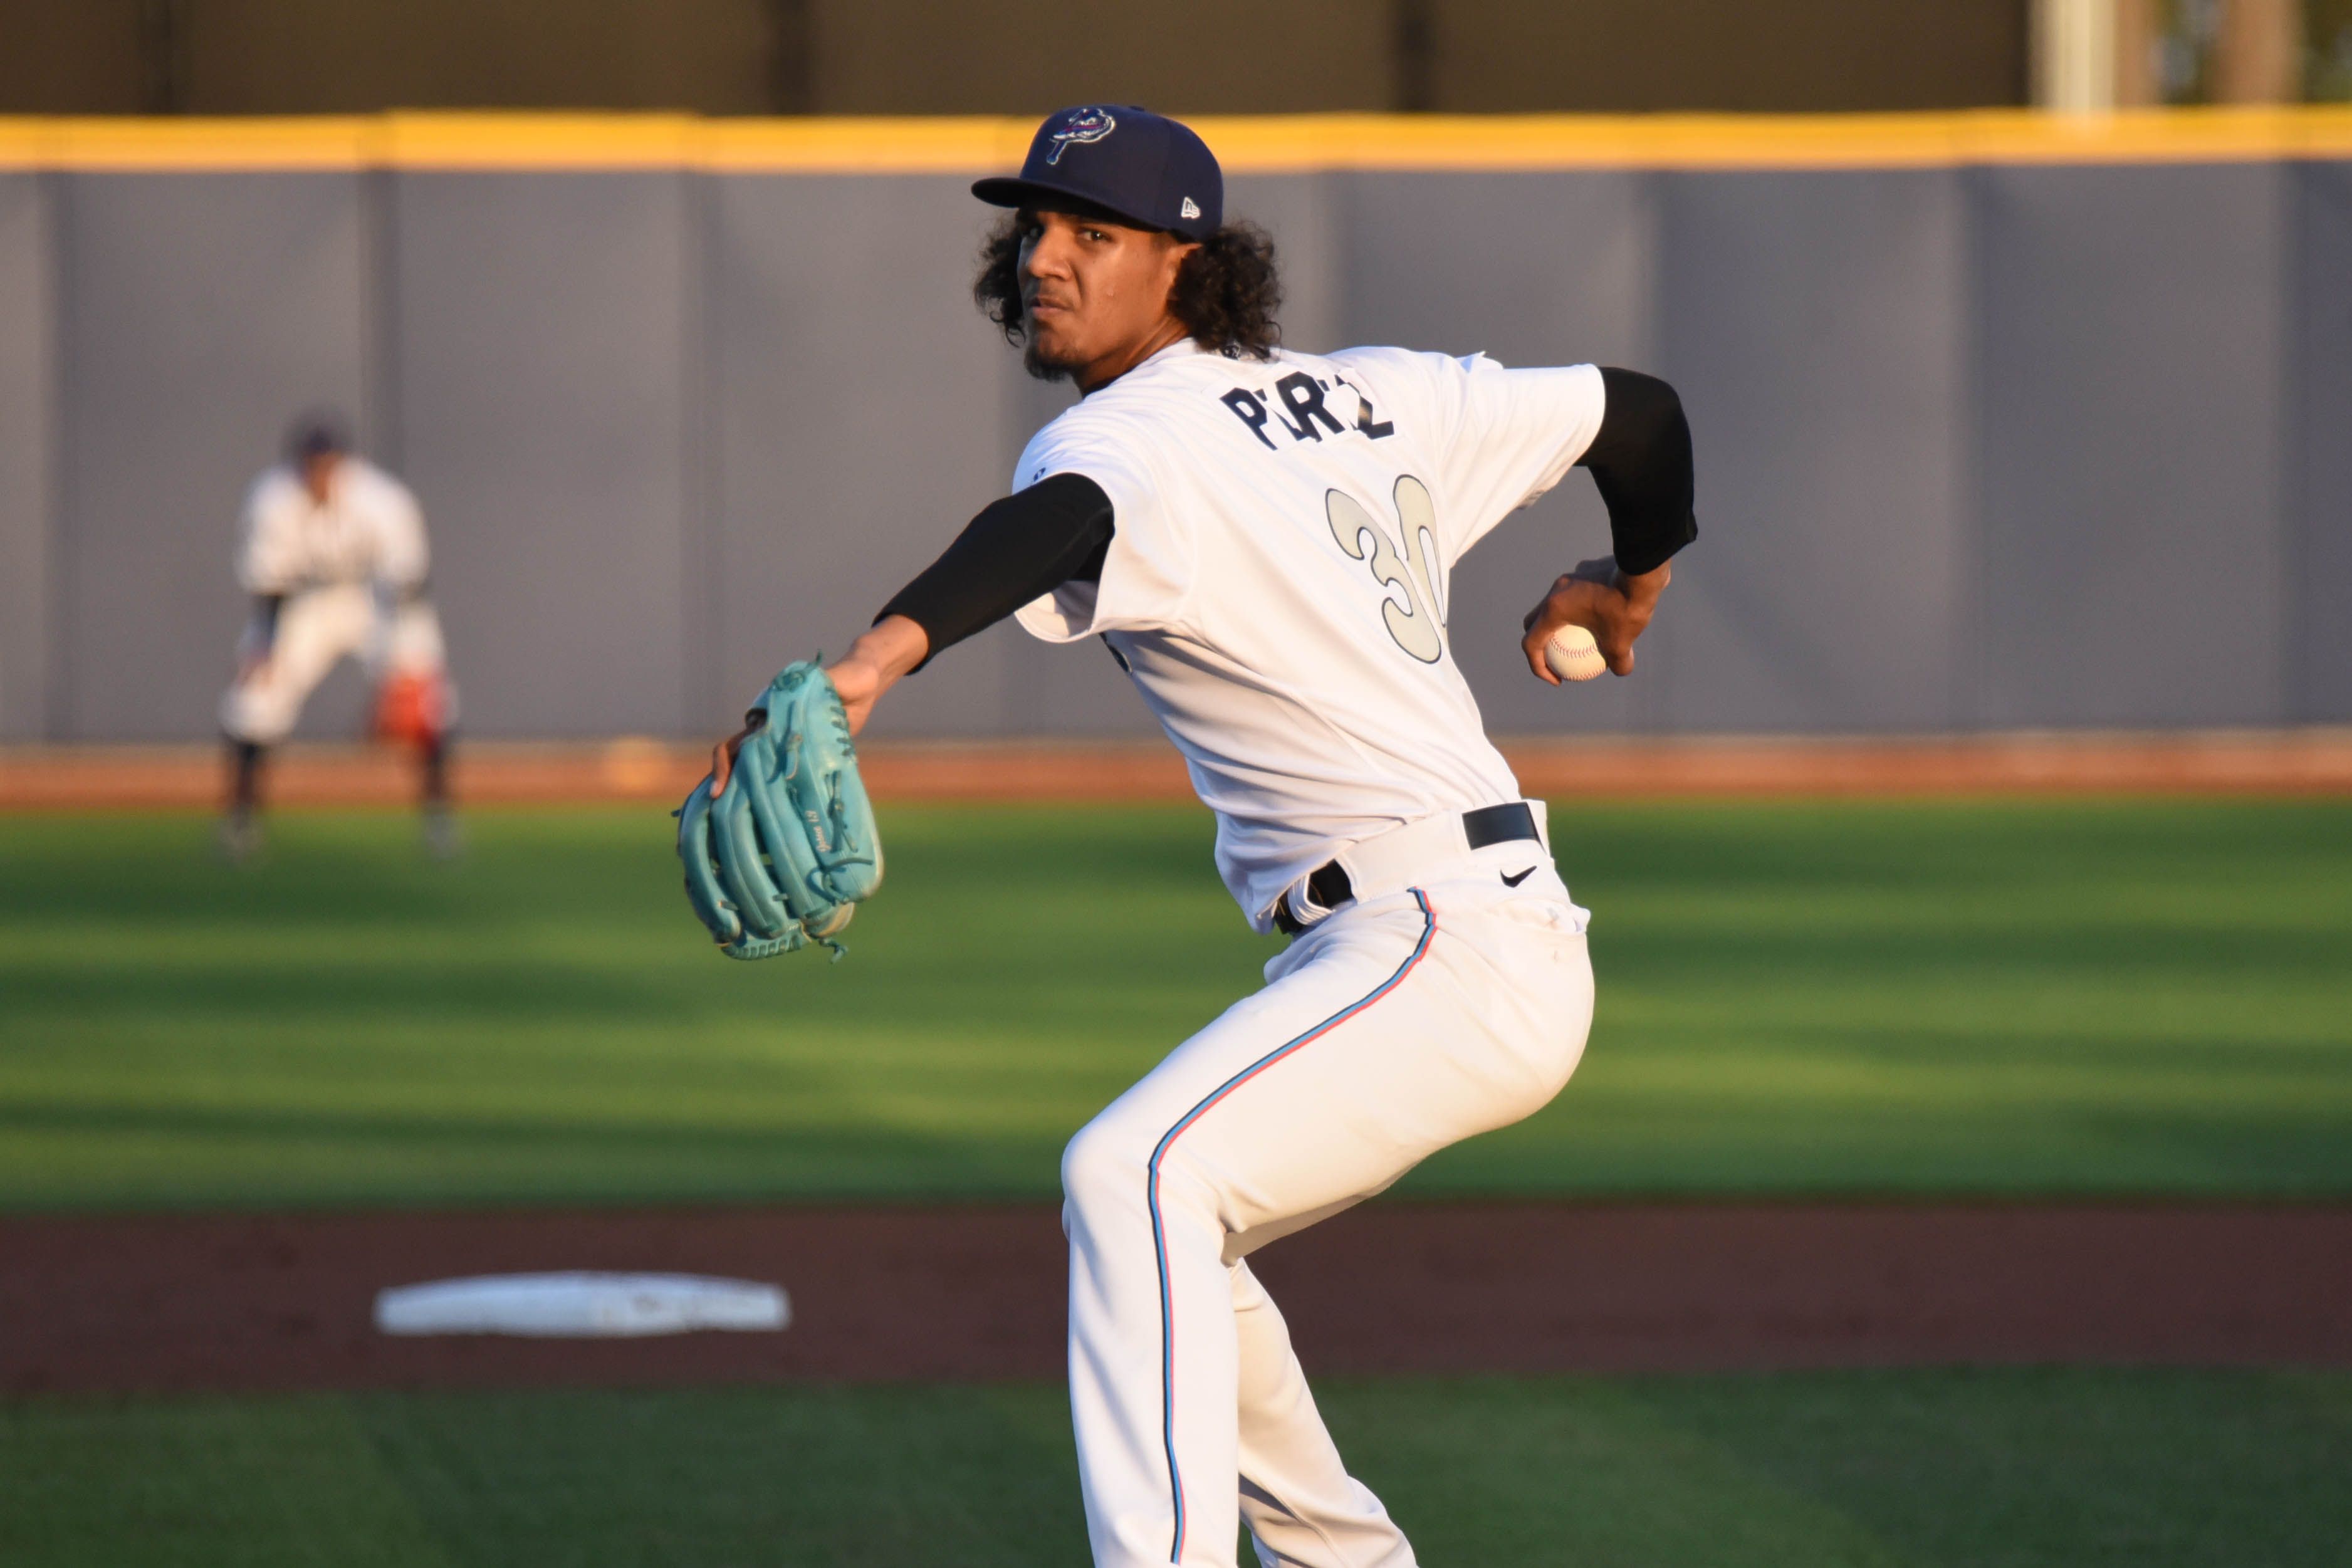 Right-hander Eury Pérez pitching for the Pensacola Blue Wahoos, Double-A affiliate of the Miami Marlins